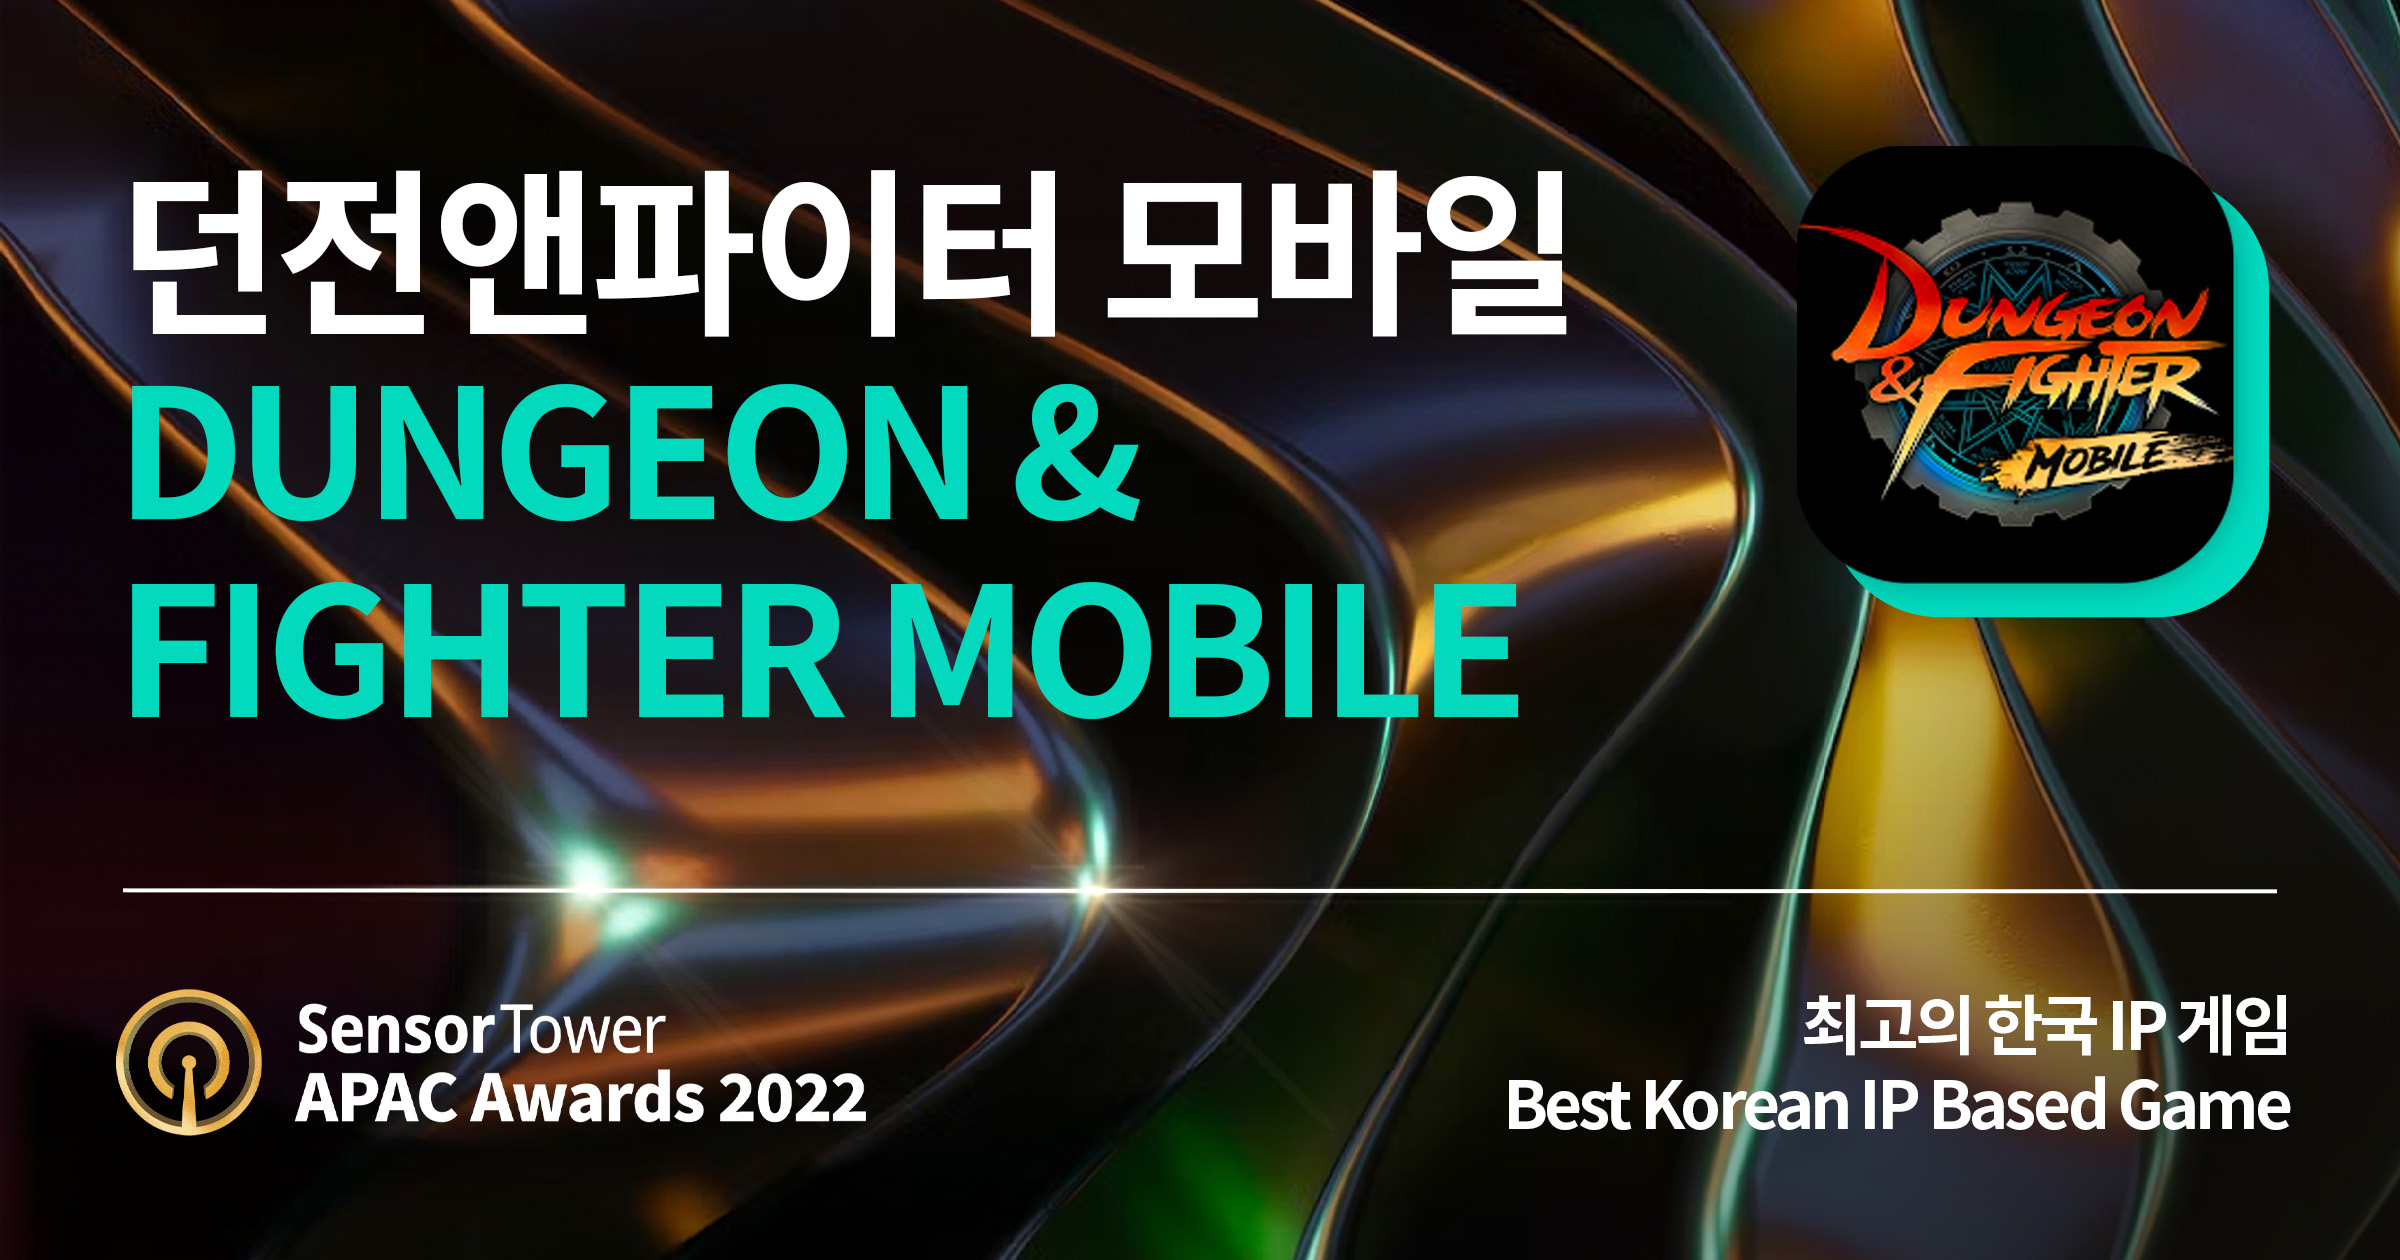 2022 APAC Awards Dungeon & Fighter Mobile